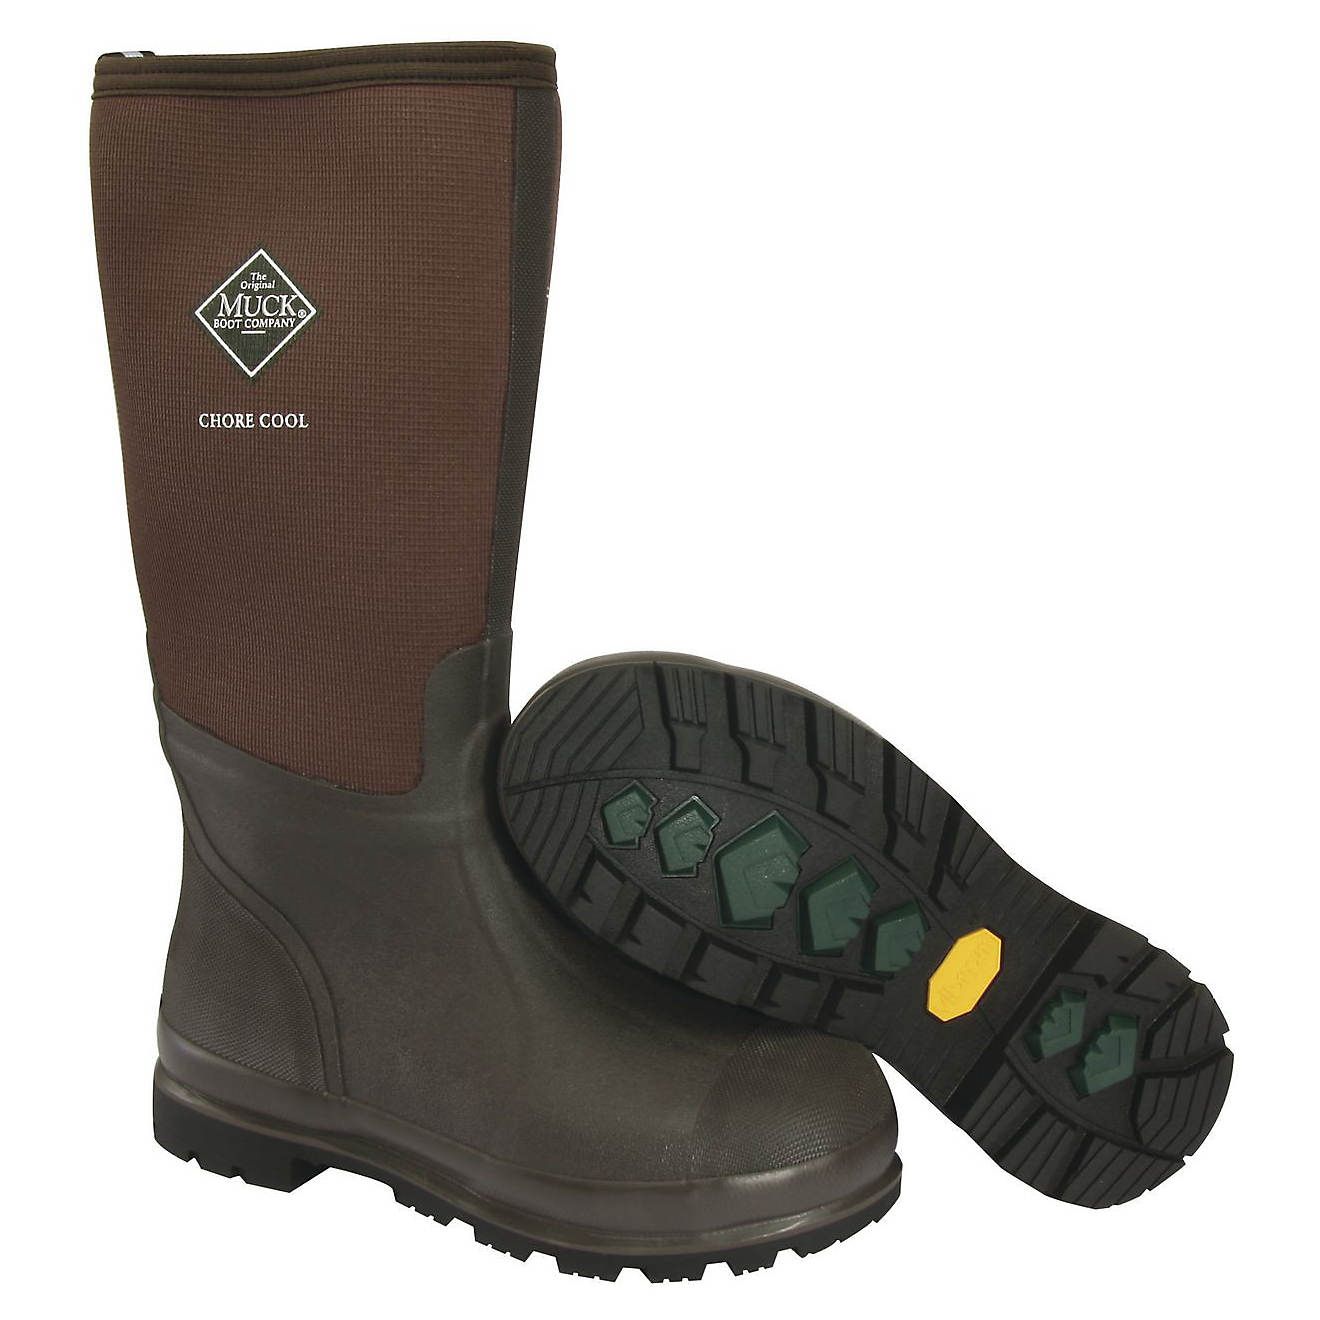 Muck Boot Men's Chore Cool Work Boots | Academy Sports + Outdoor Affiliate